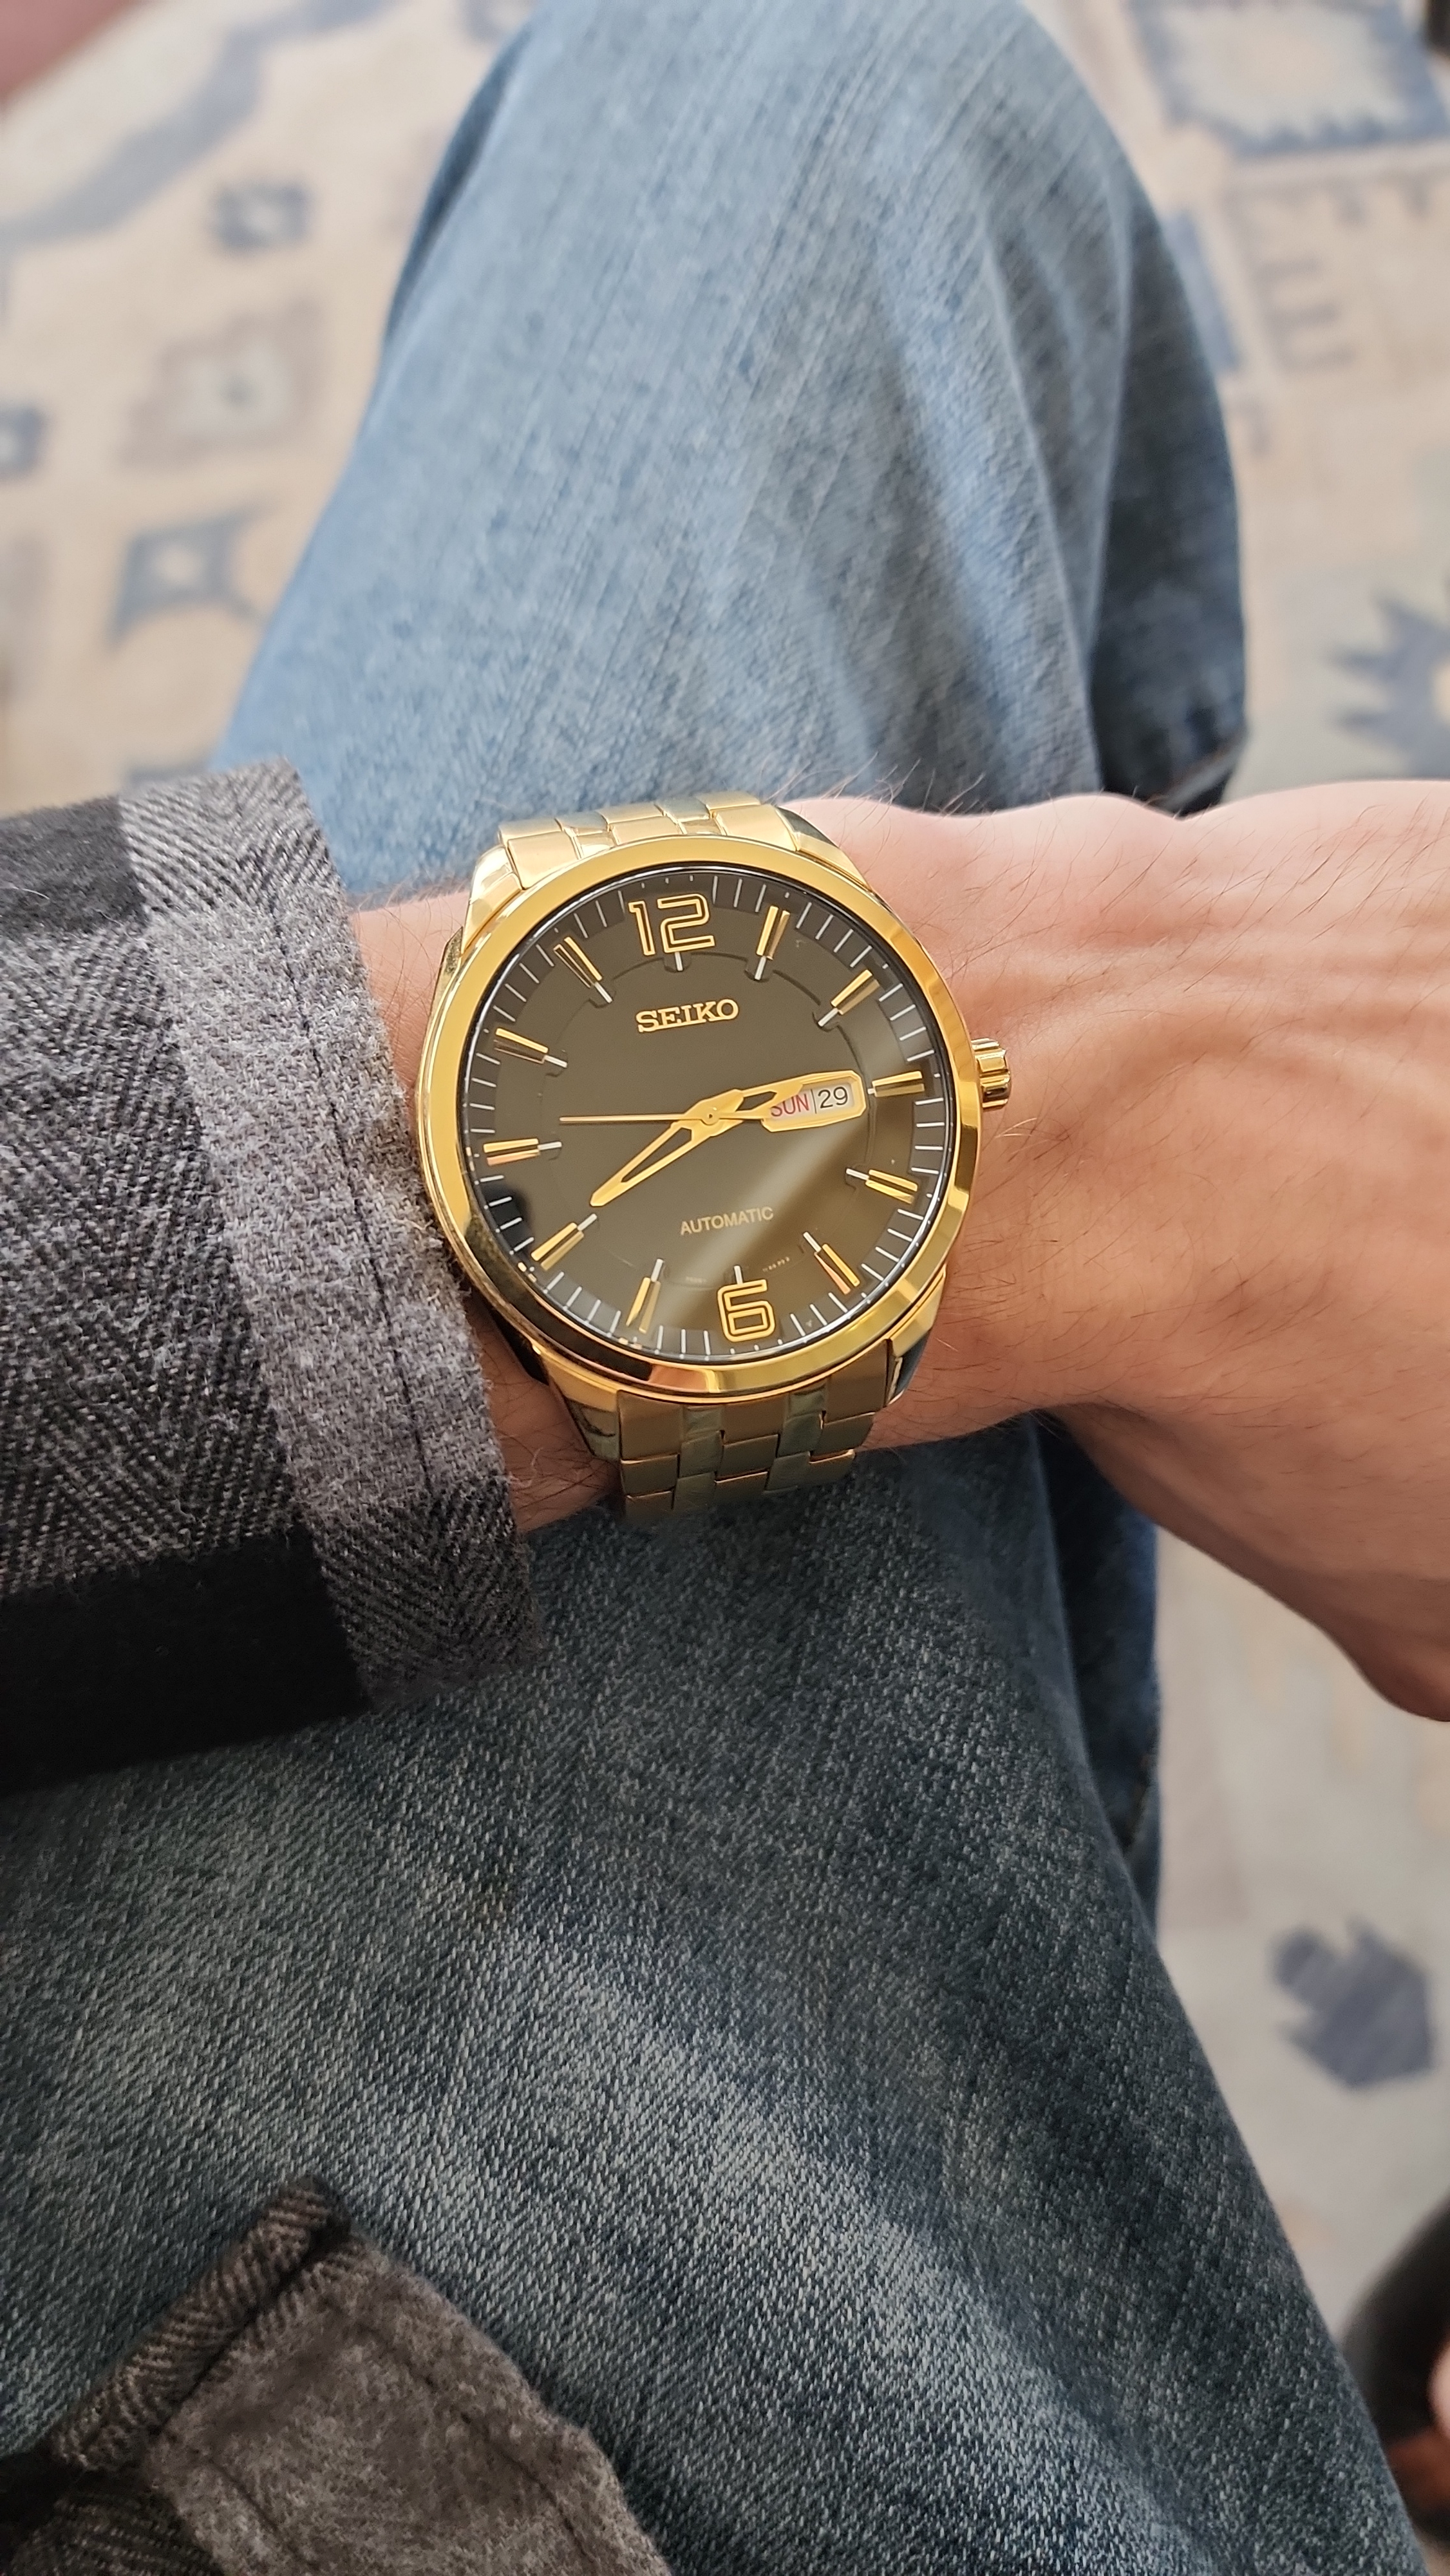 What model is this? and is it too big for my wrist. Received as a gift. | Scrolller